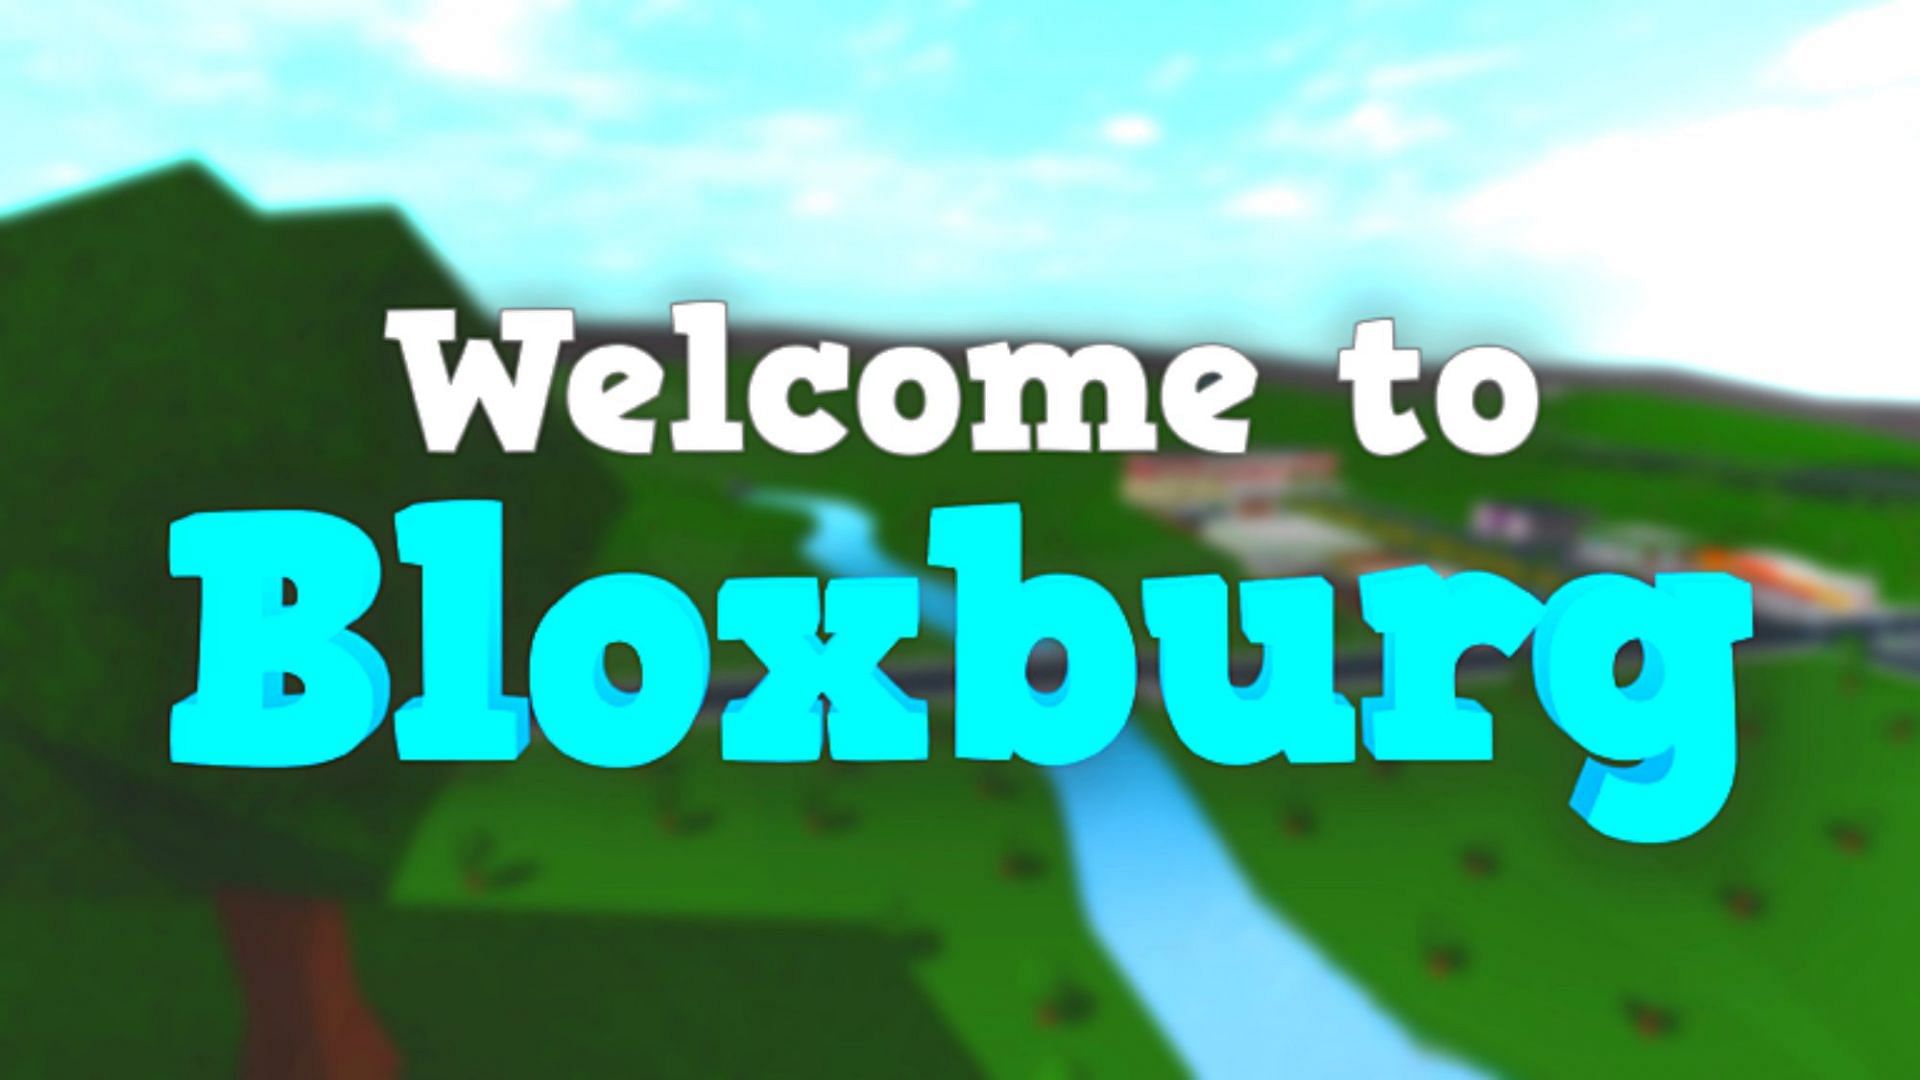  Welcome to Bloxburg gets acquired by Embracer Group